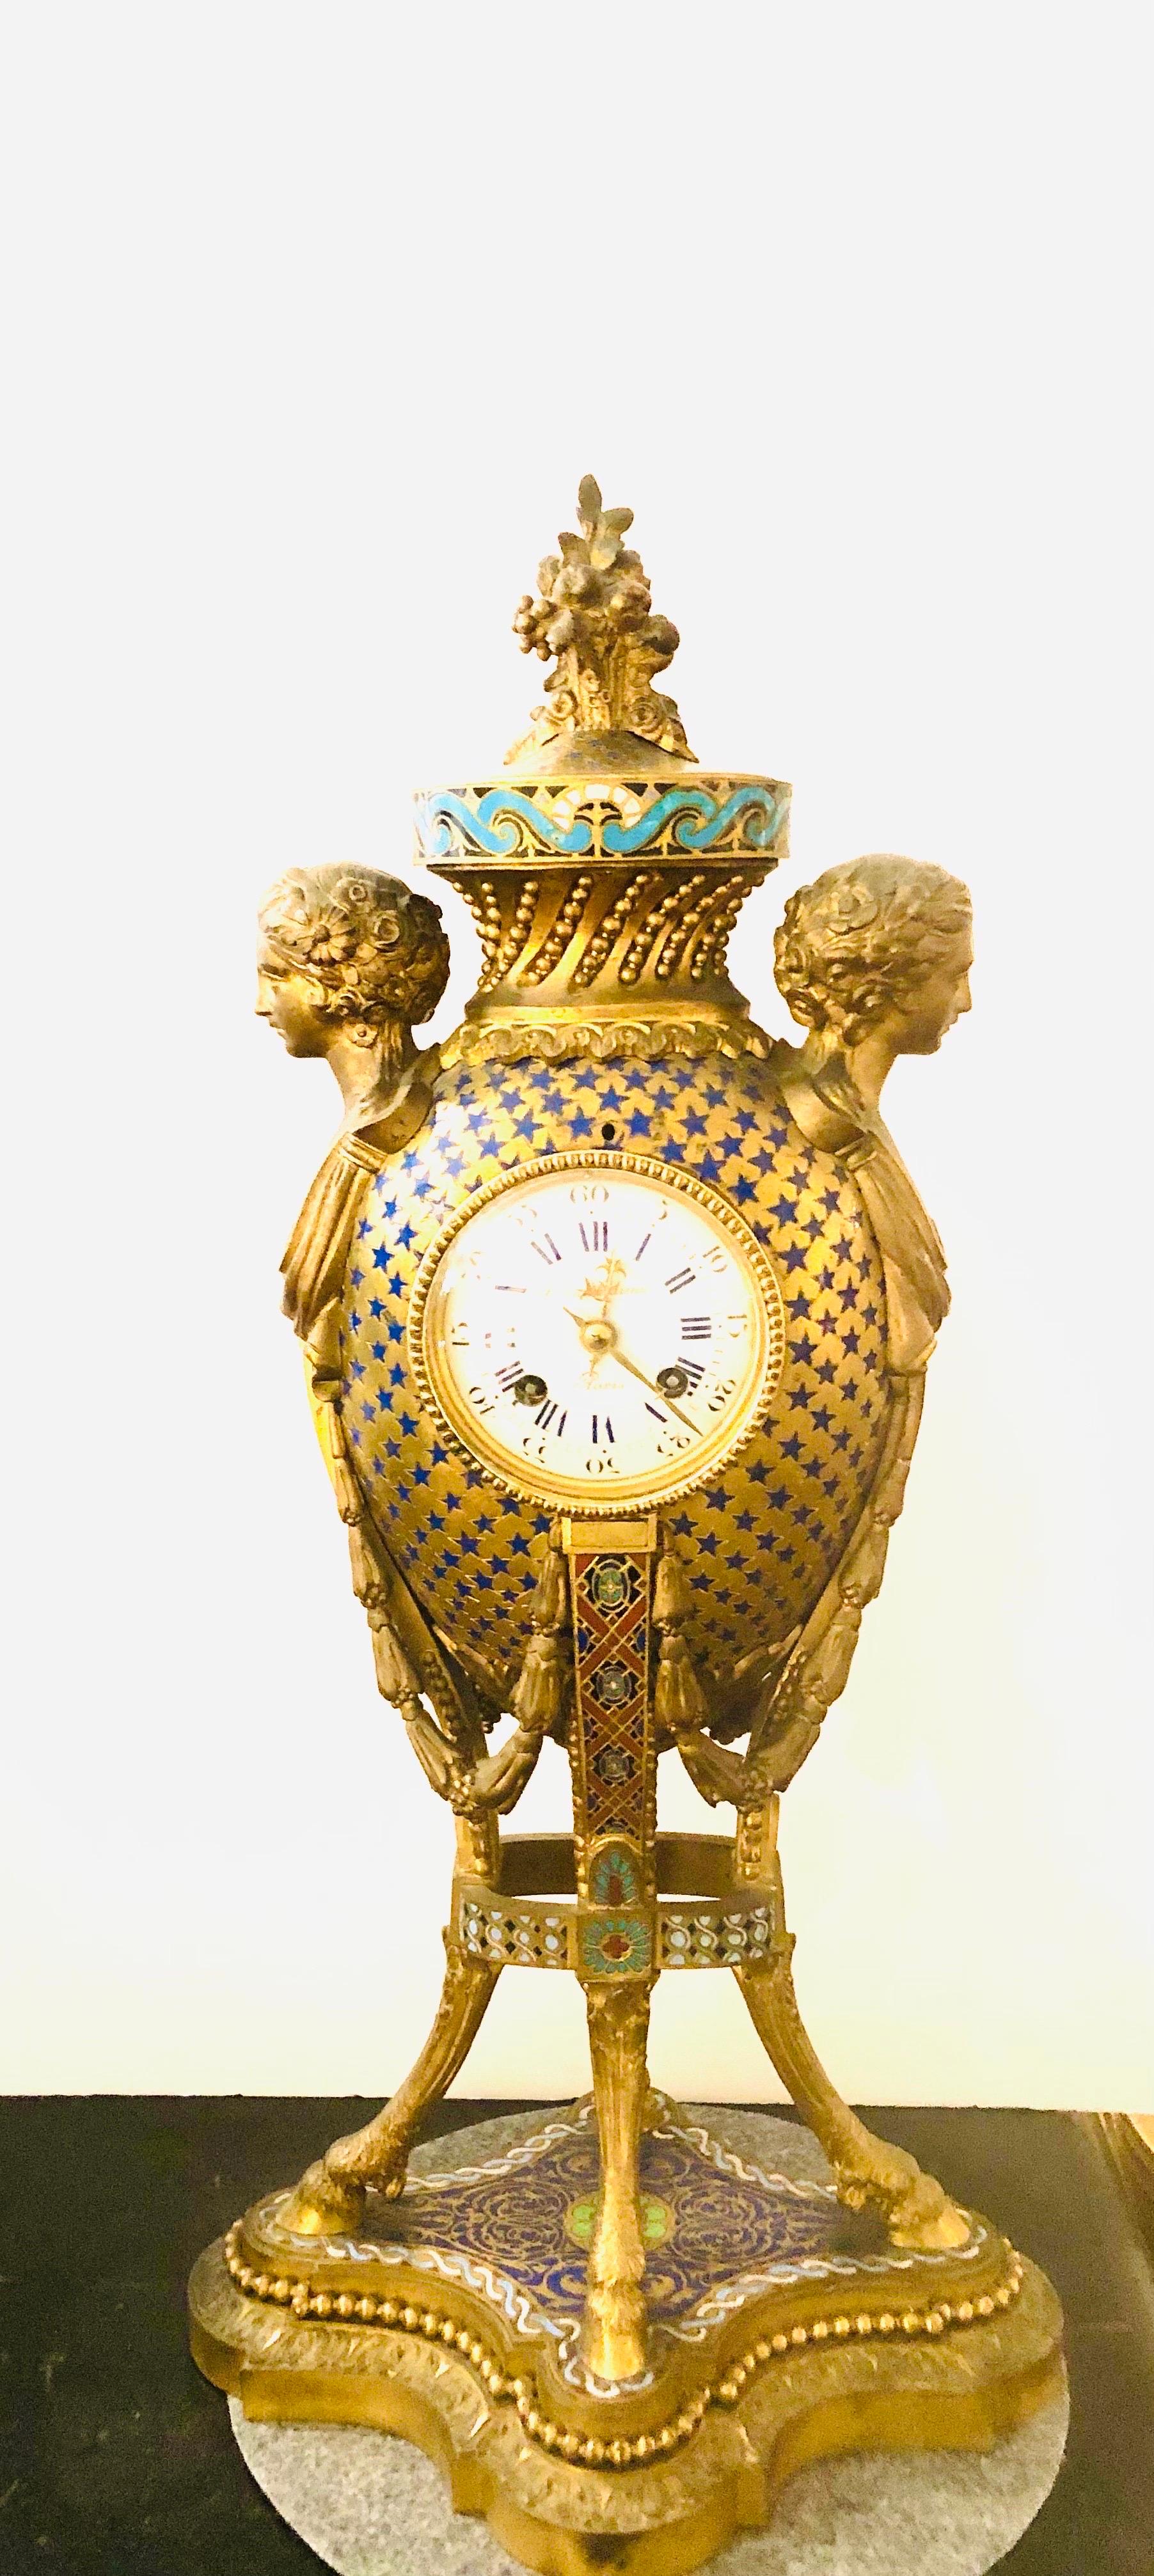 Bronze and Enamel Barbedienne Paris Clock with Figural Ladies’ Faces & Hoof Feet In Good Condition For Sale In Boston, MA